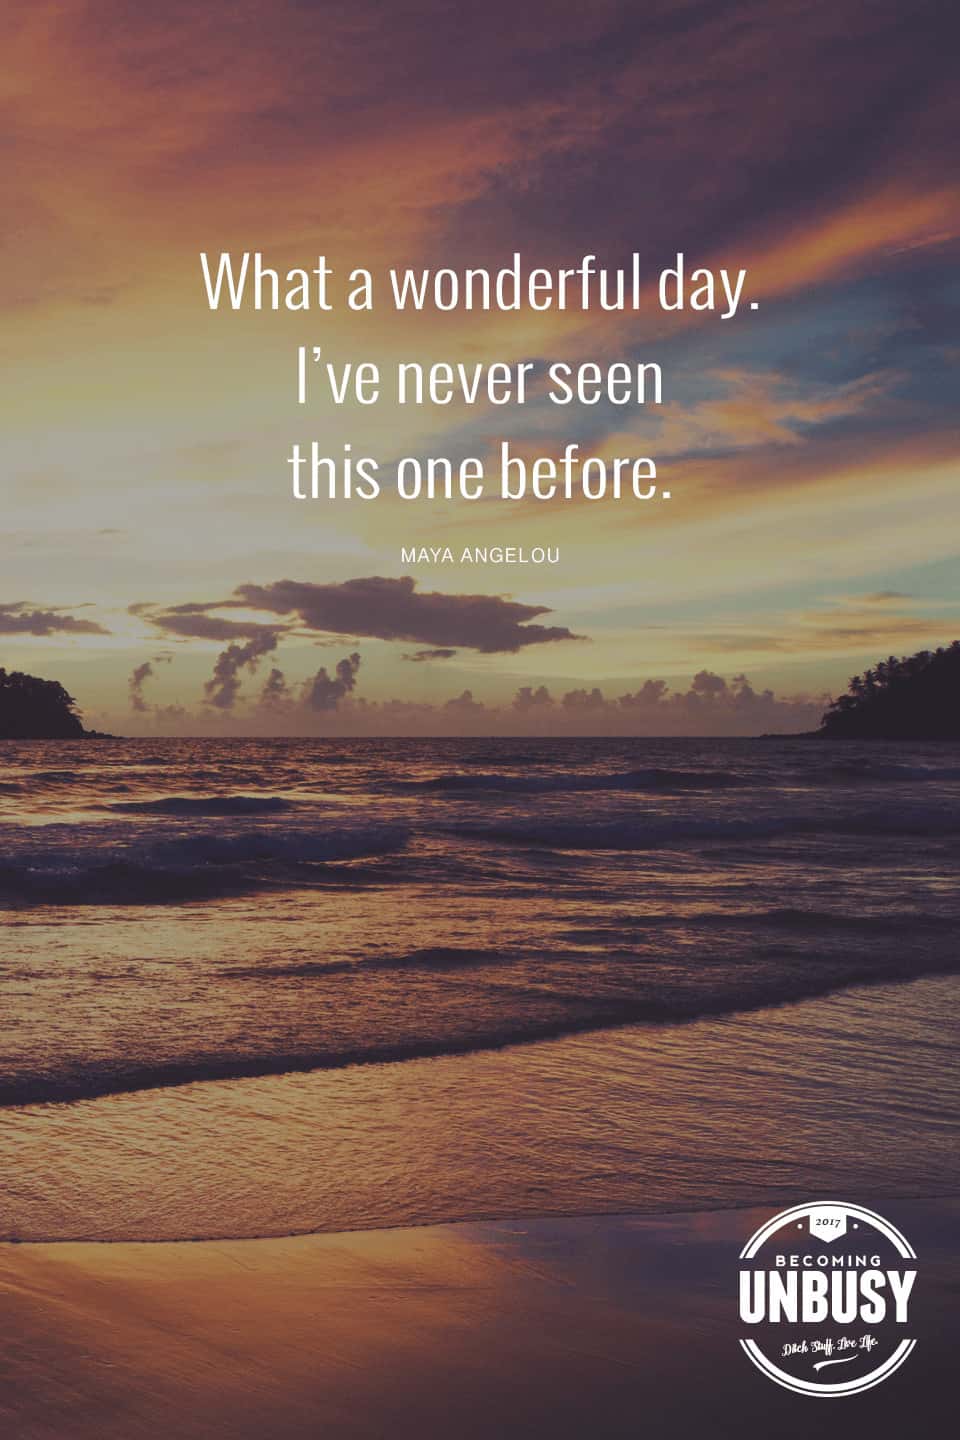 What a wonderful day, I've never seen this one before... - Maya Angelou *love this quote, this happy list and this Becoming UnBusy site